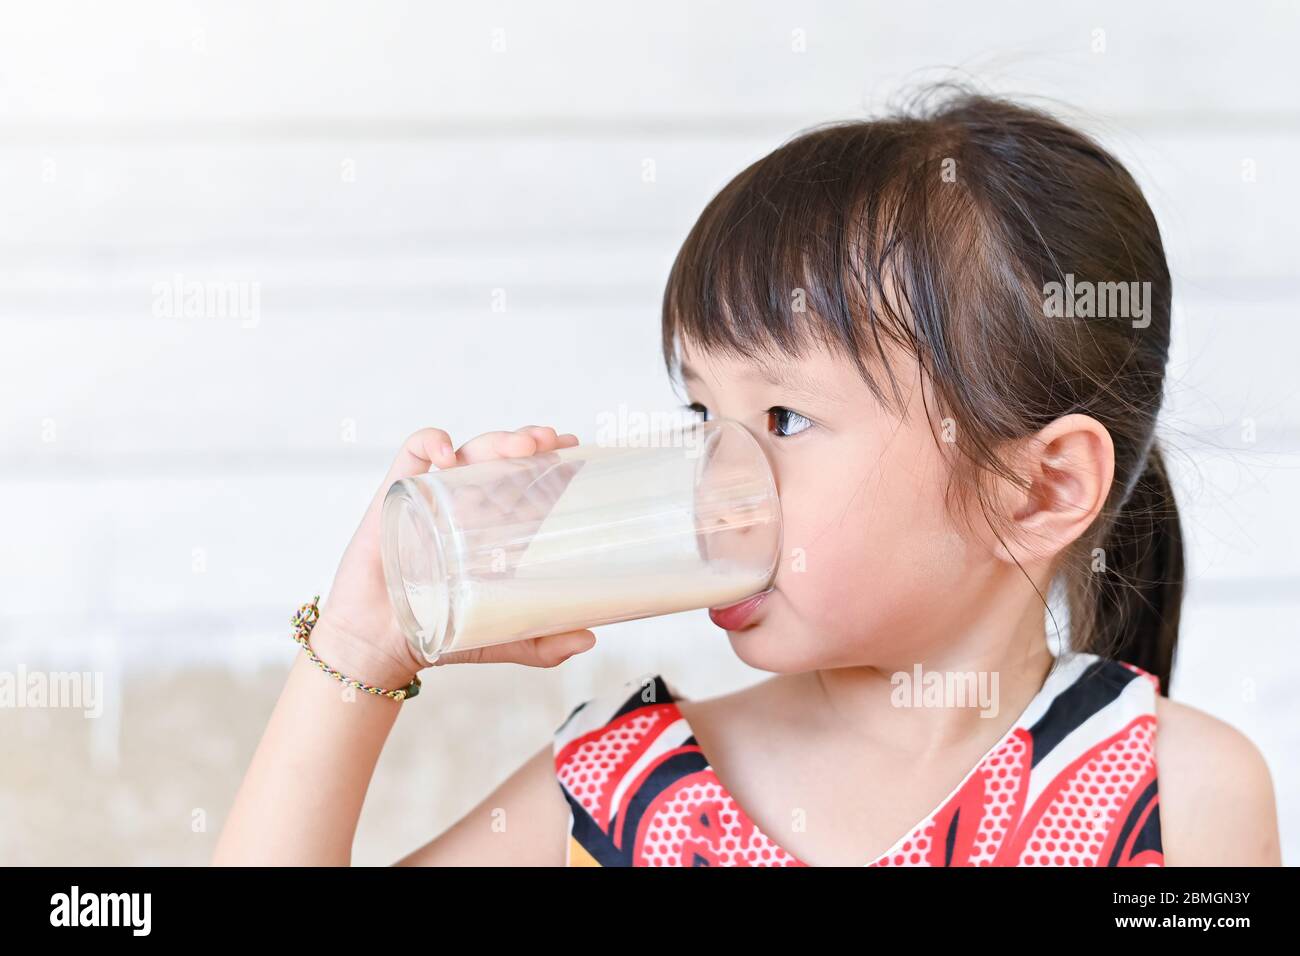 https://c8.alamy.com/comp/2BMGN3Y/cute-smiling-girl-with-a-glass-of-milk-little-girl-drinking-milk-and-leaving-a-mustache-2BMGN3Y.jpg